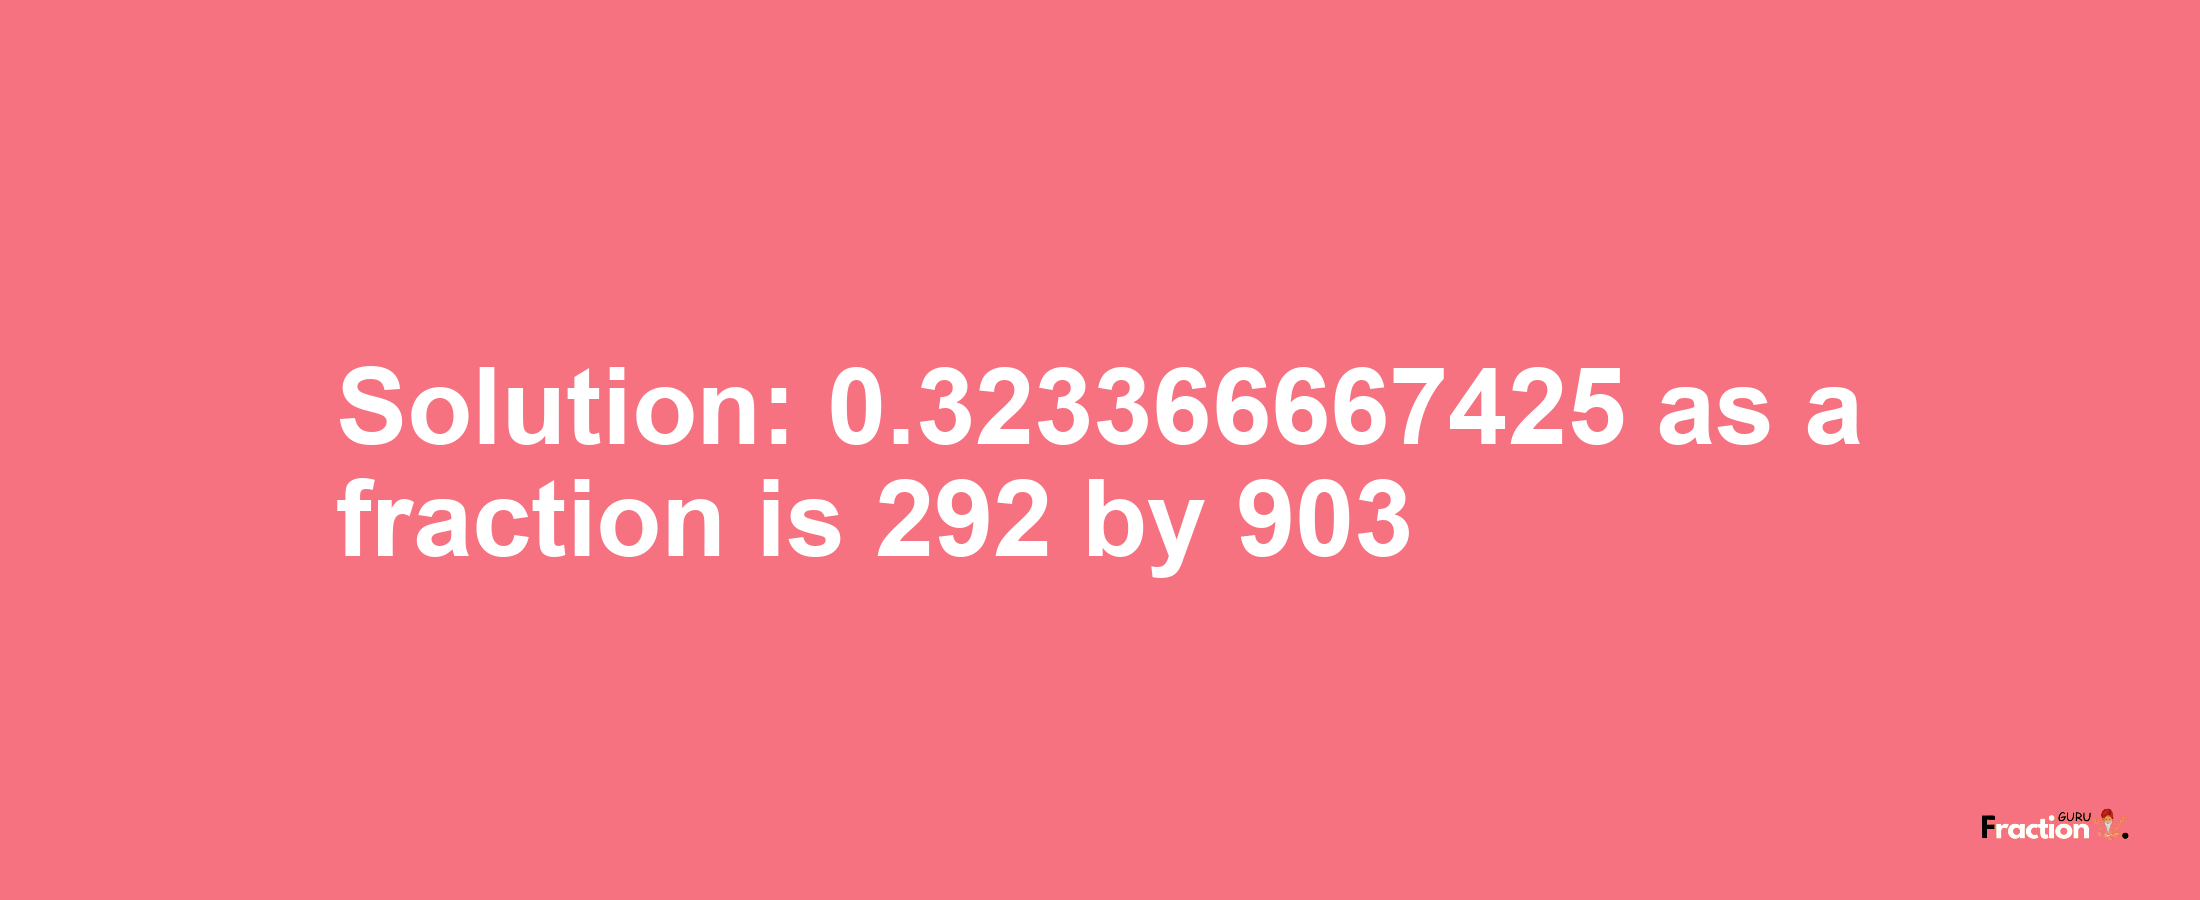 Solution:0.323366667425 as a fraction is 292/903